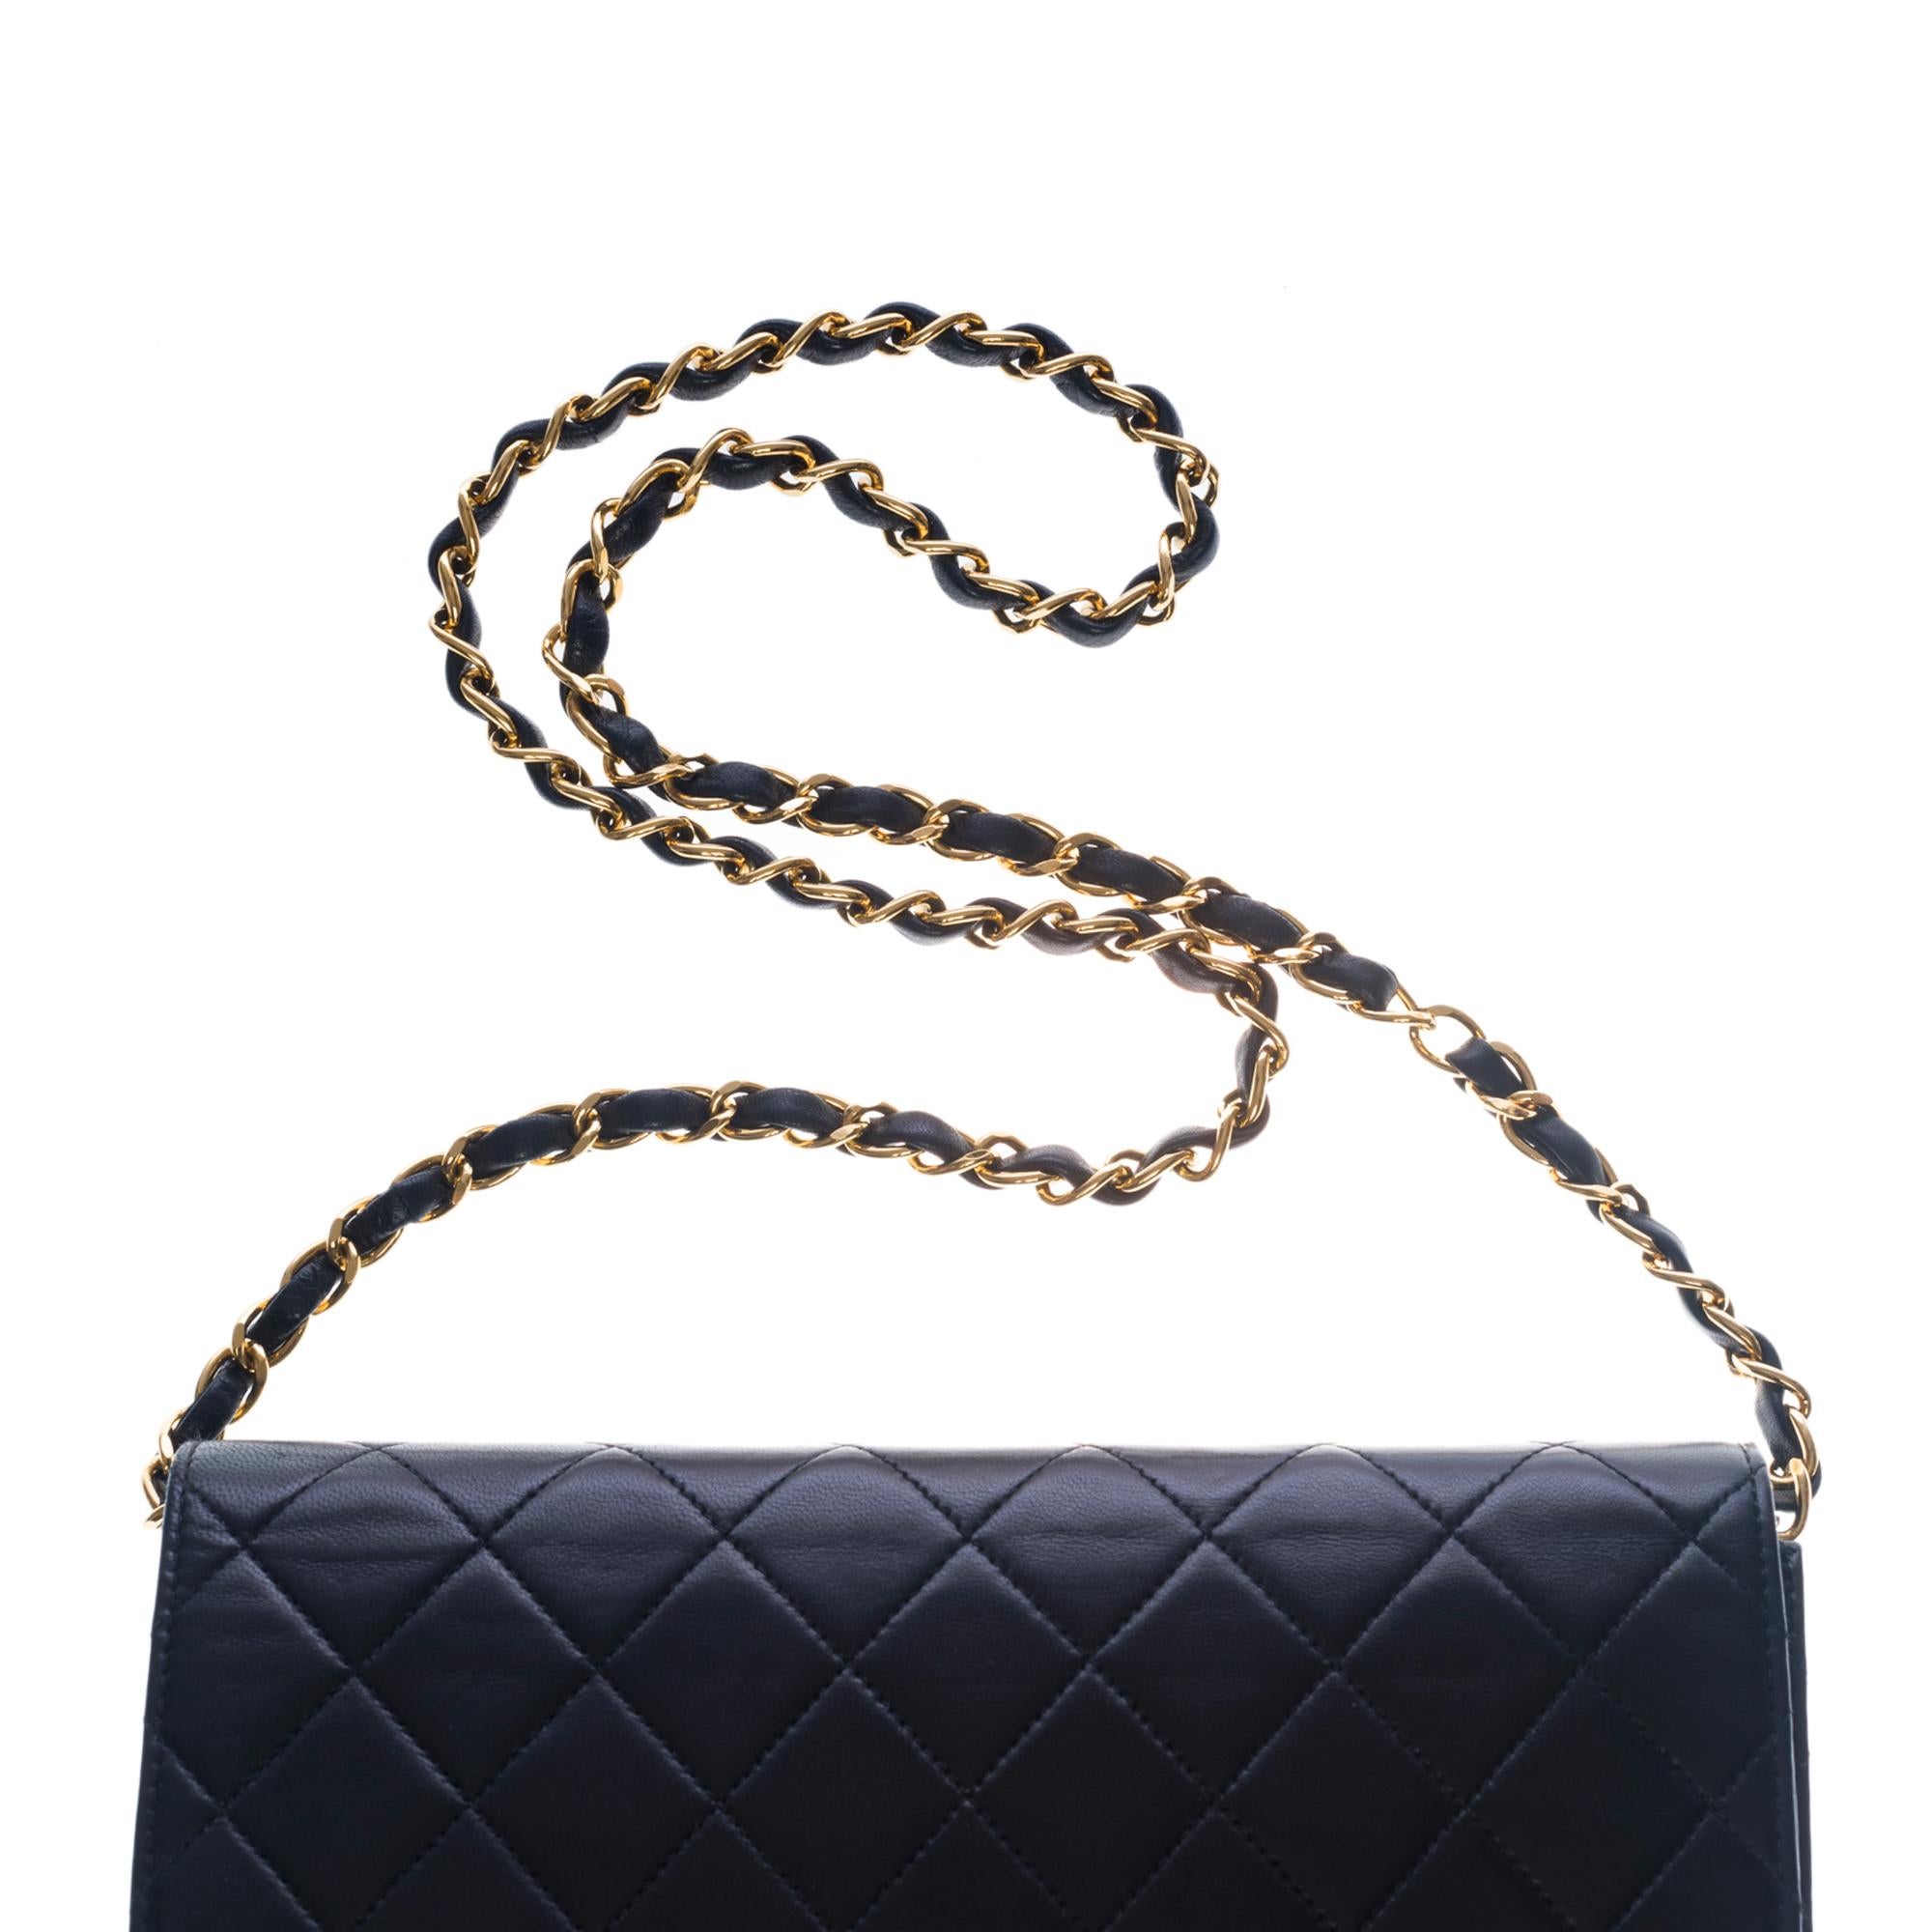 Amazing Chanel Classic Flap shoulder bag in black quilted lambskin, GHW 4